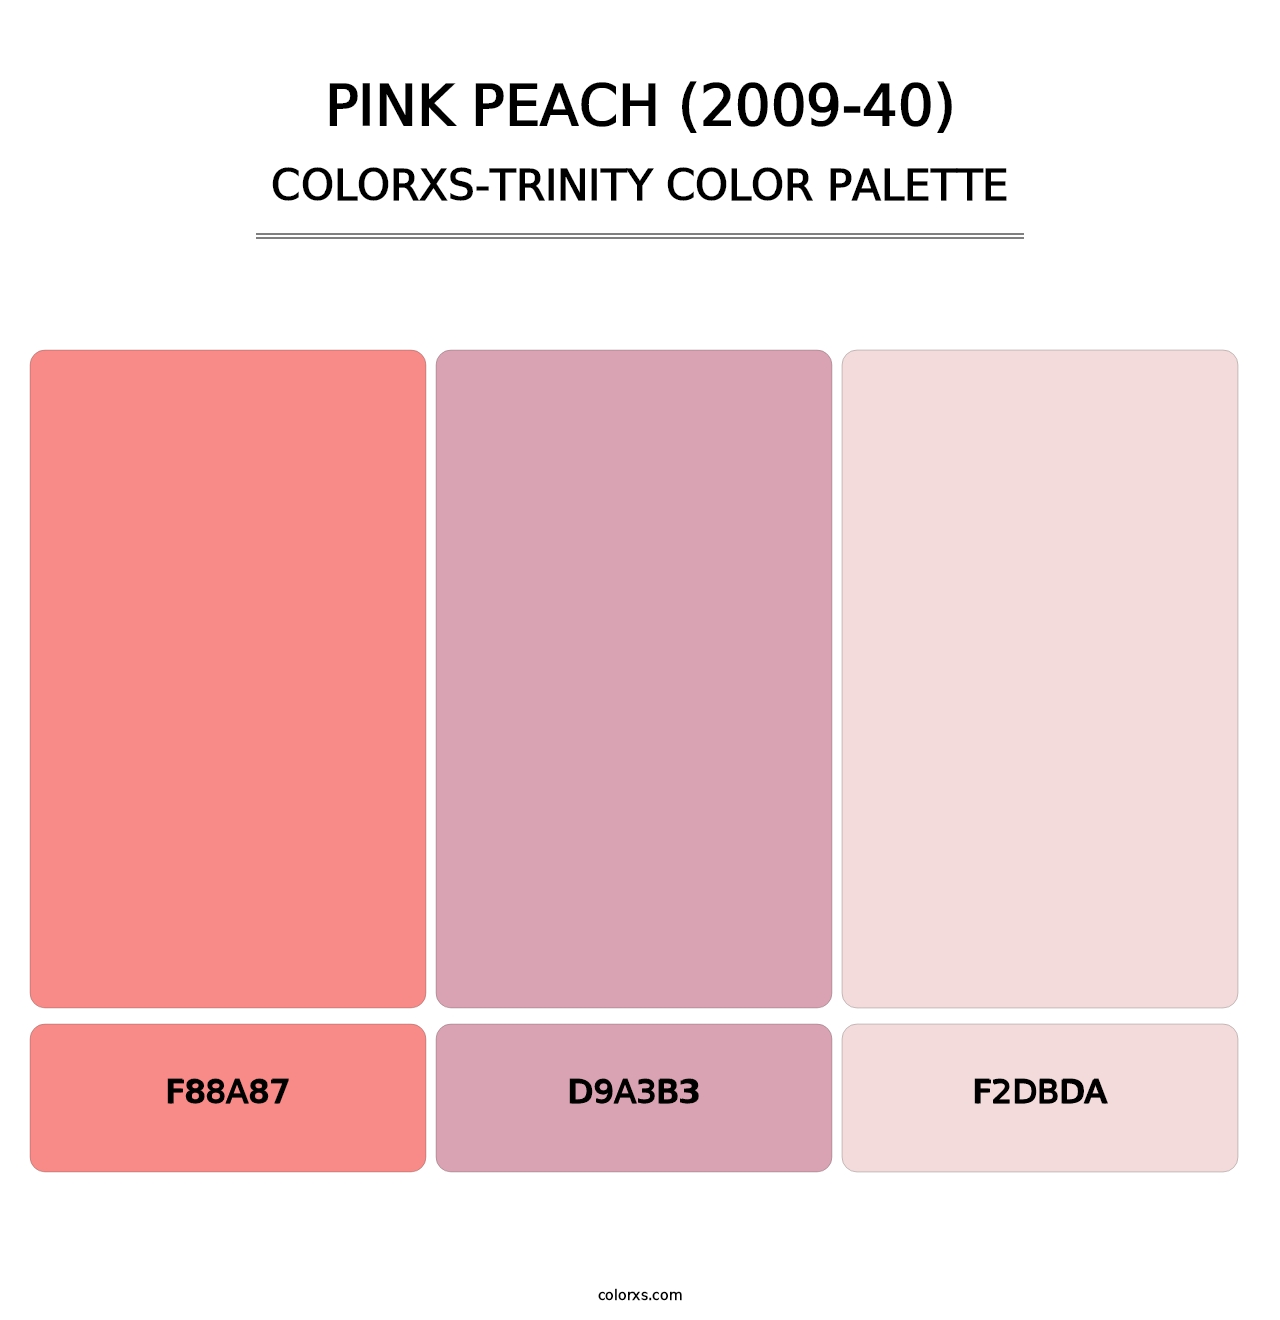 Pink Peach (2009-40) - Colorxs Trinity Palette